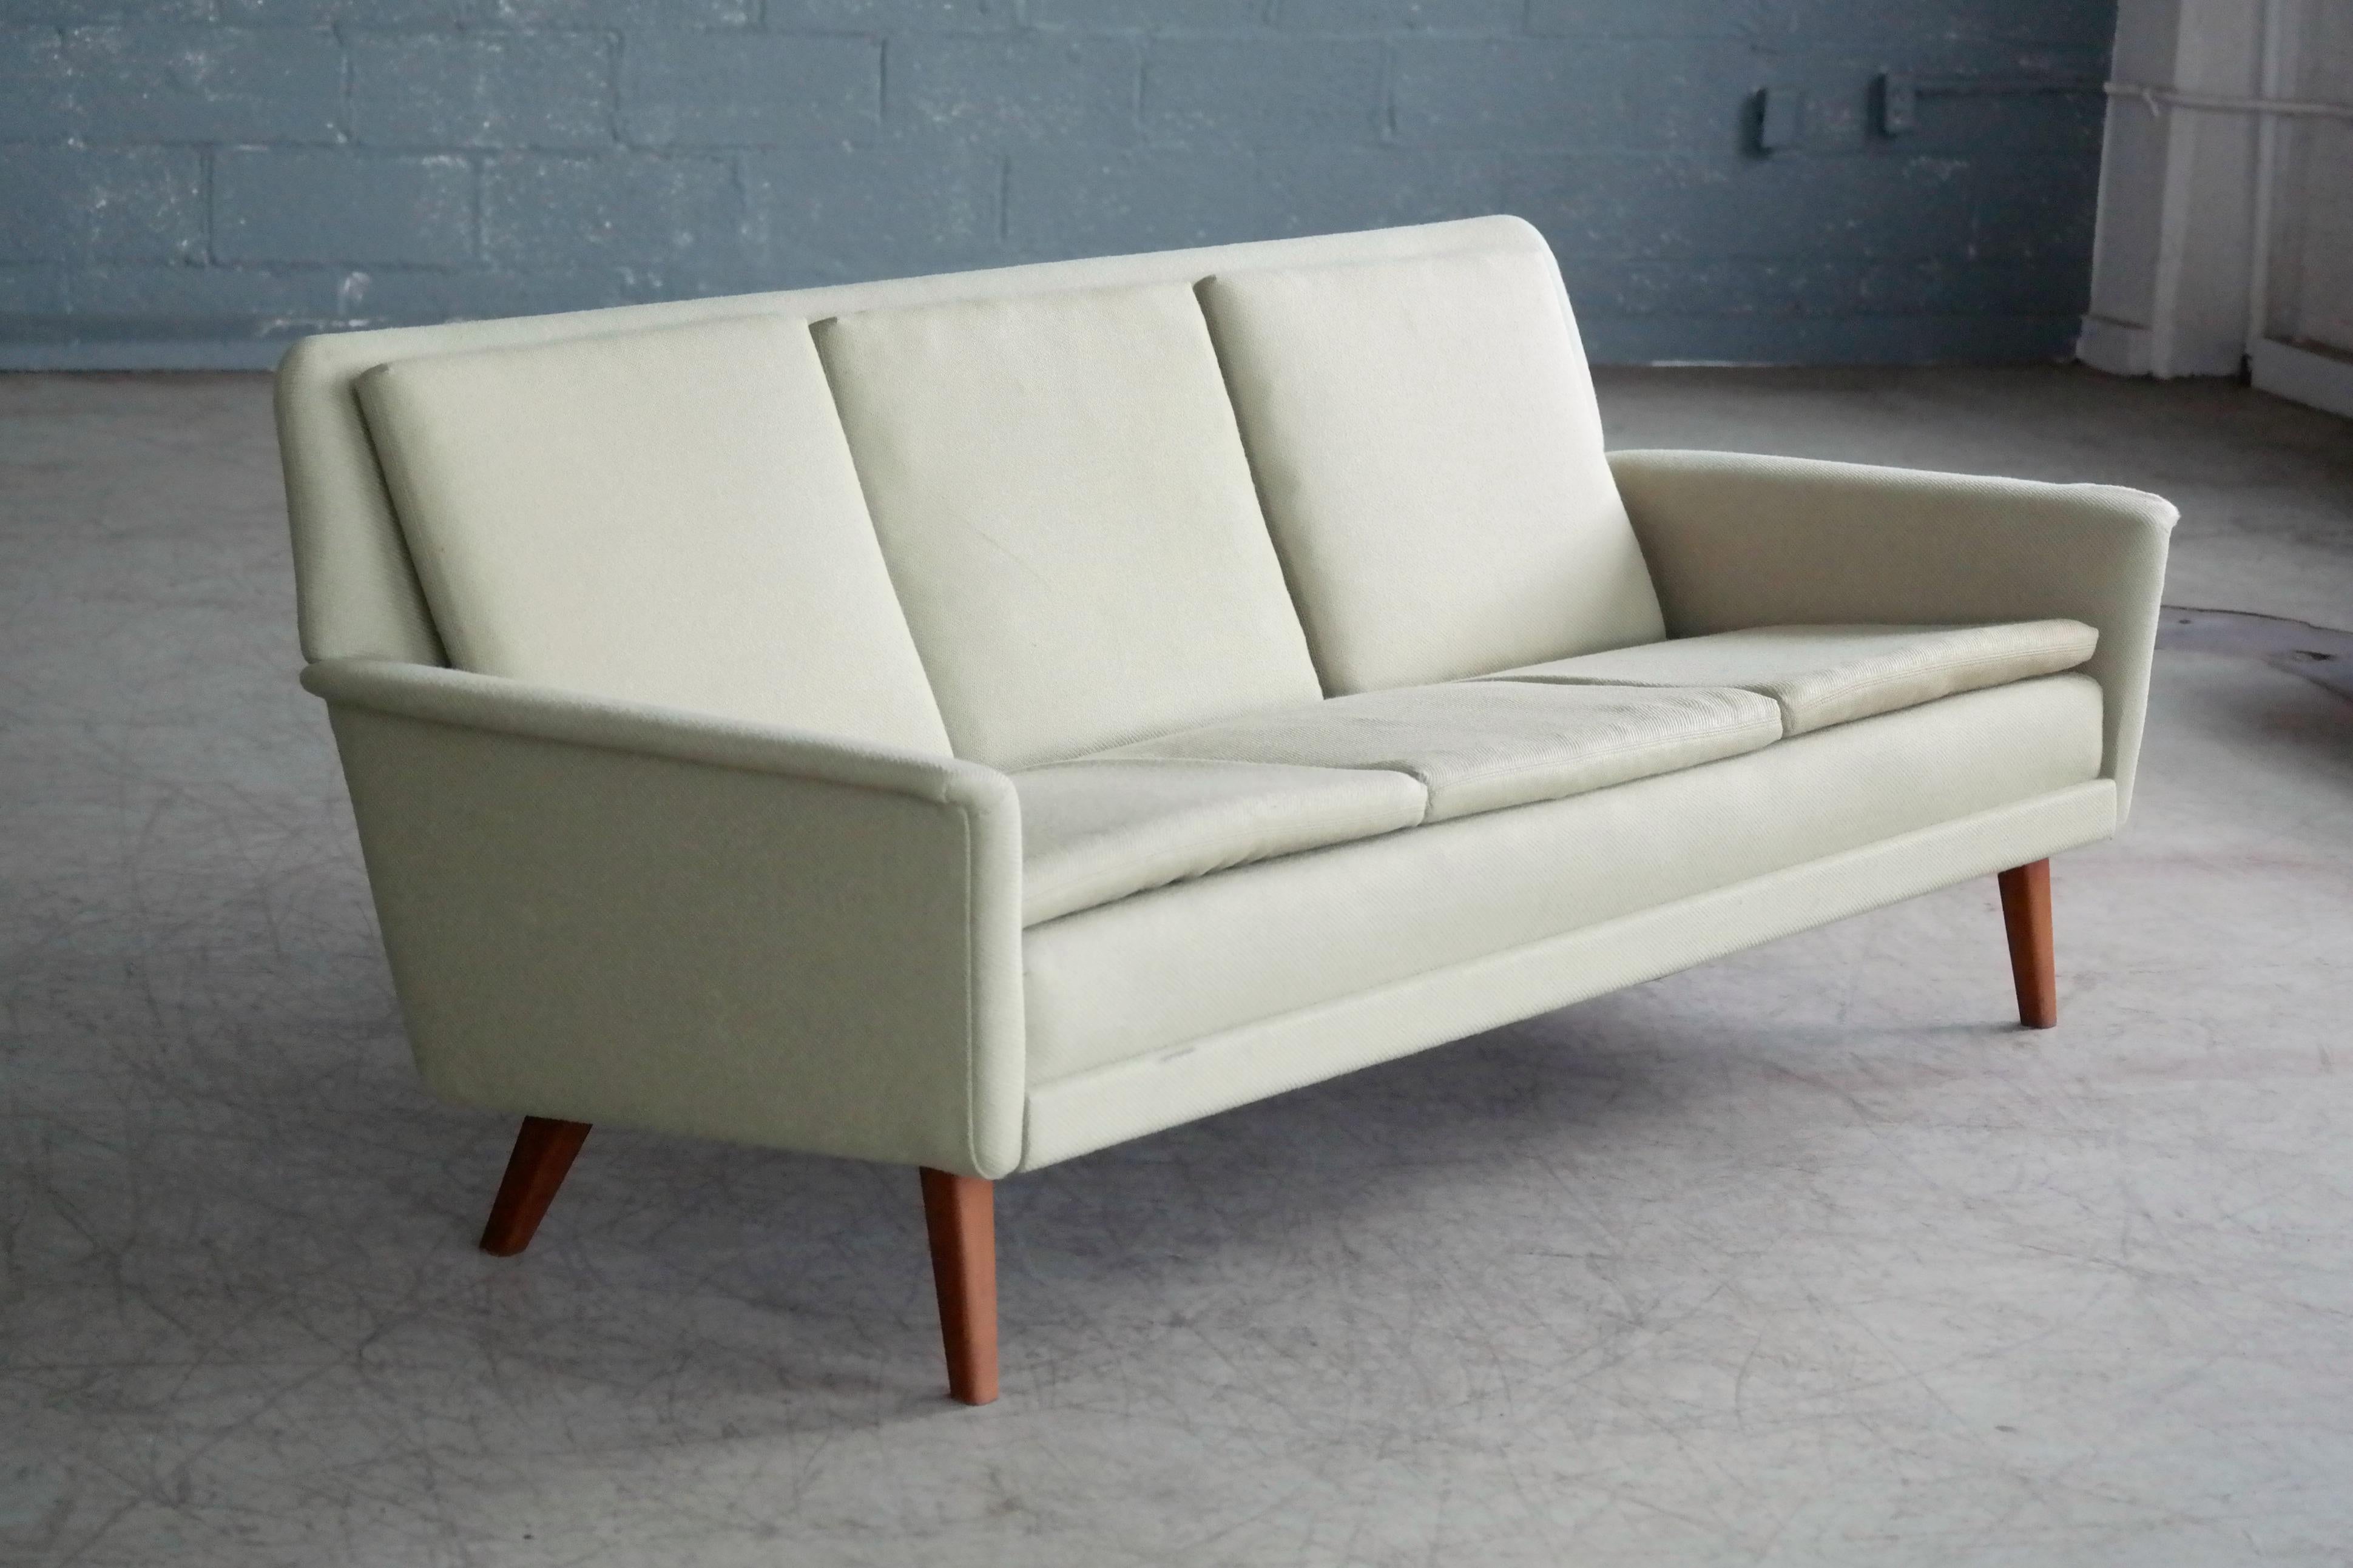 Classic and very elegant three-seat sofa designed by Folke Ohlsson in 1955 as Model 5464 for Fritz Hansen. We love the elegant angles of the sofa and the legs combined the slim cushions. Very cutting edge in its day and just a timeless modern piece.